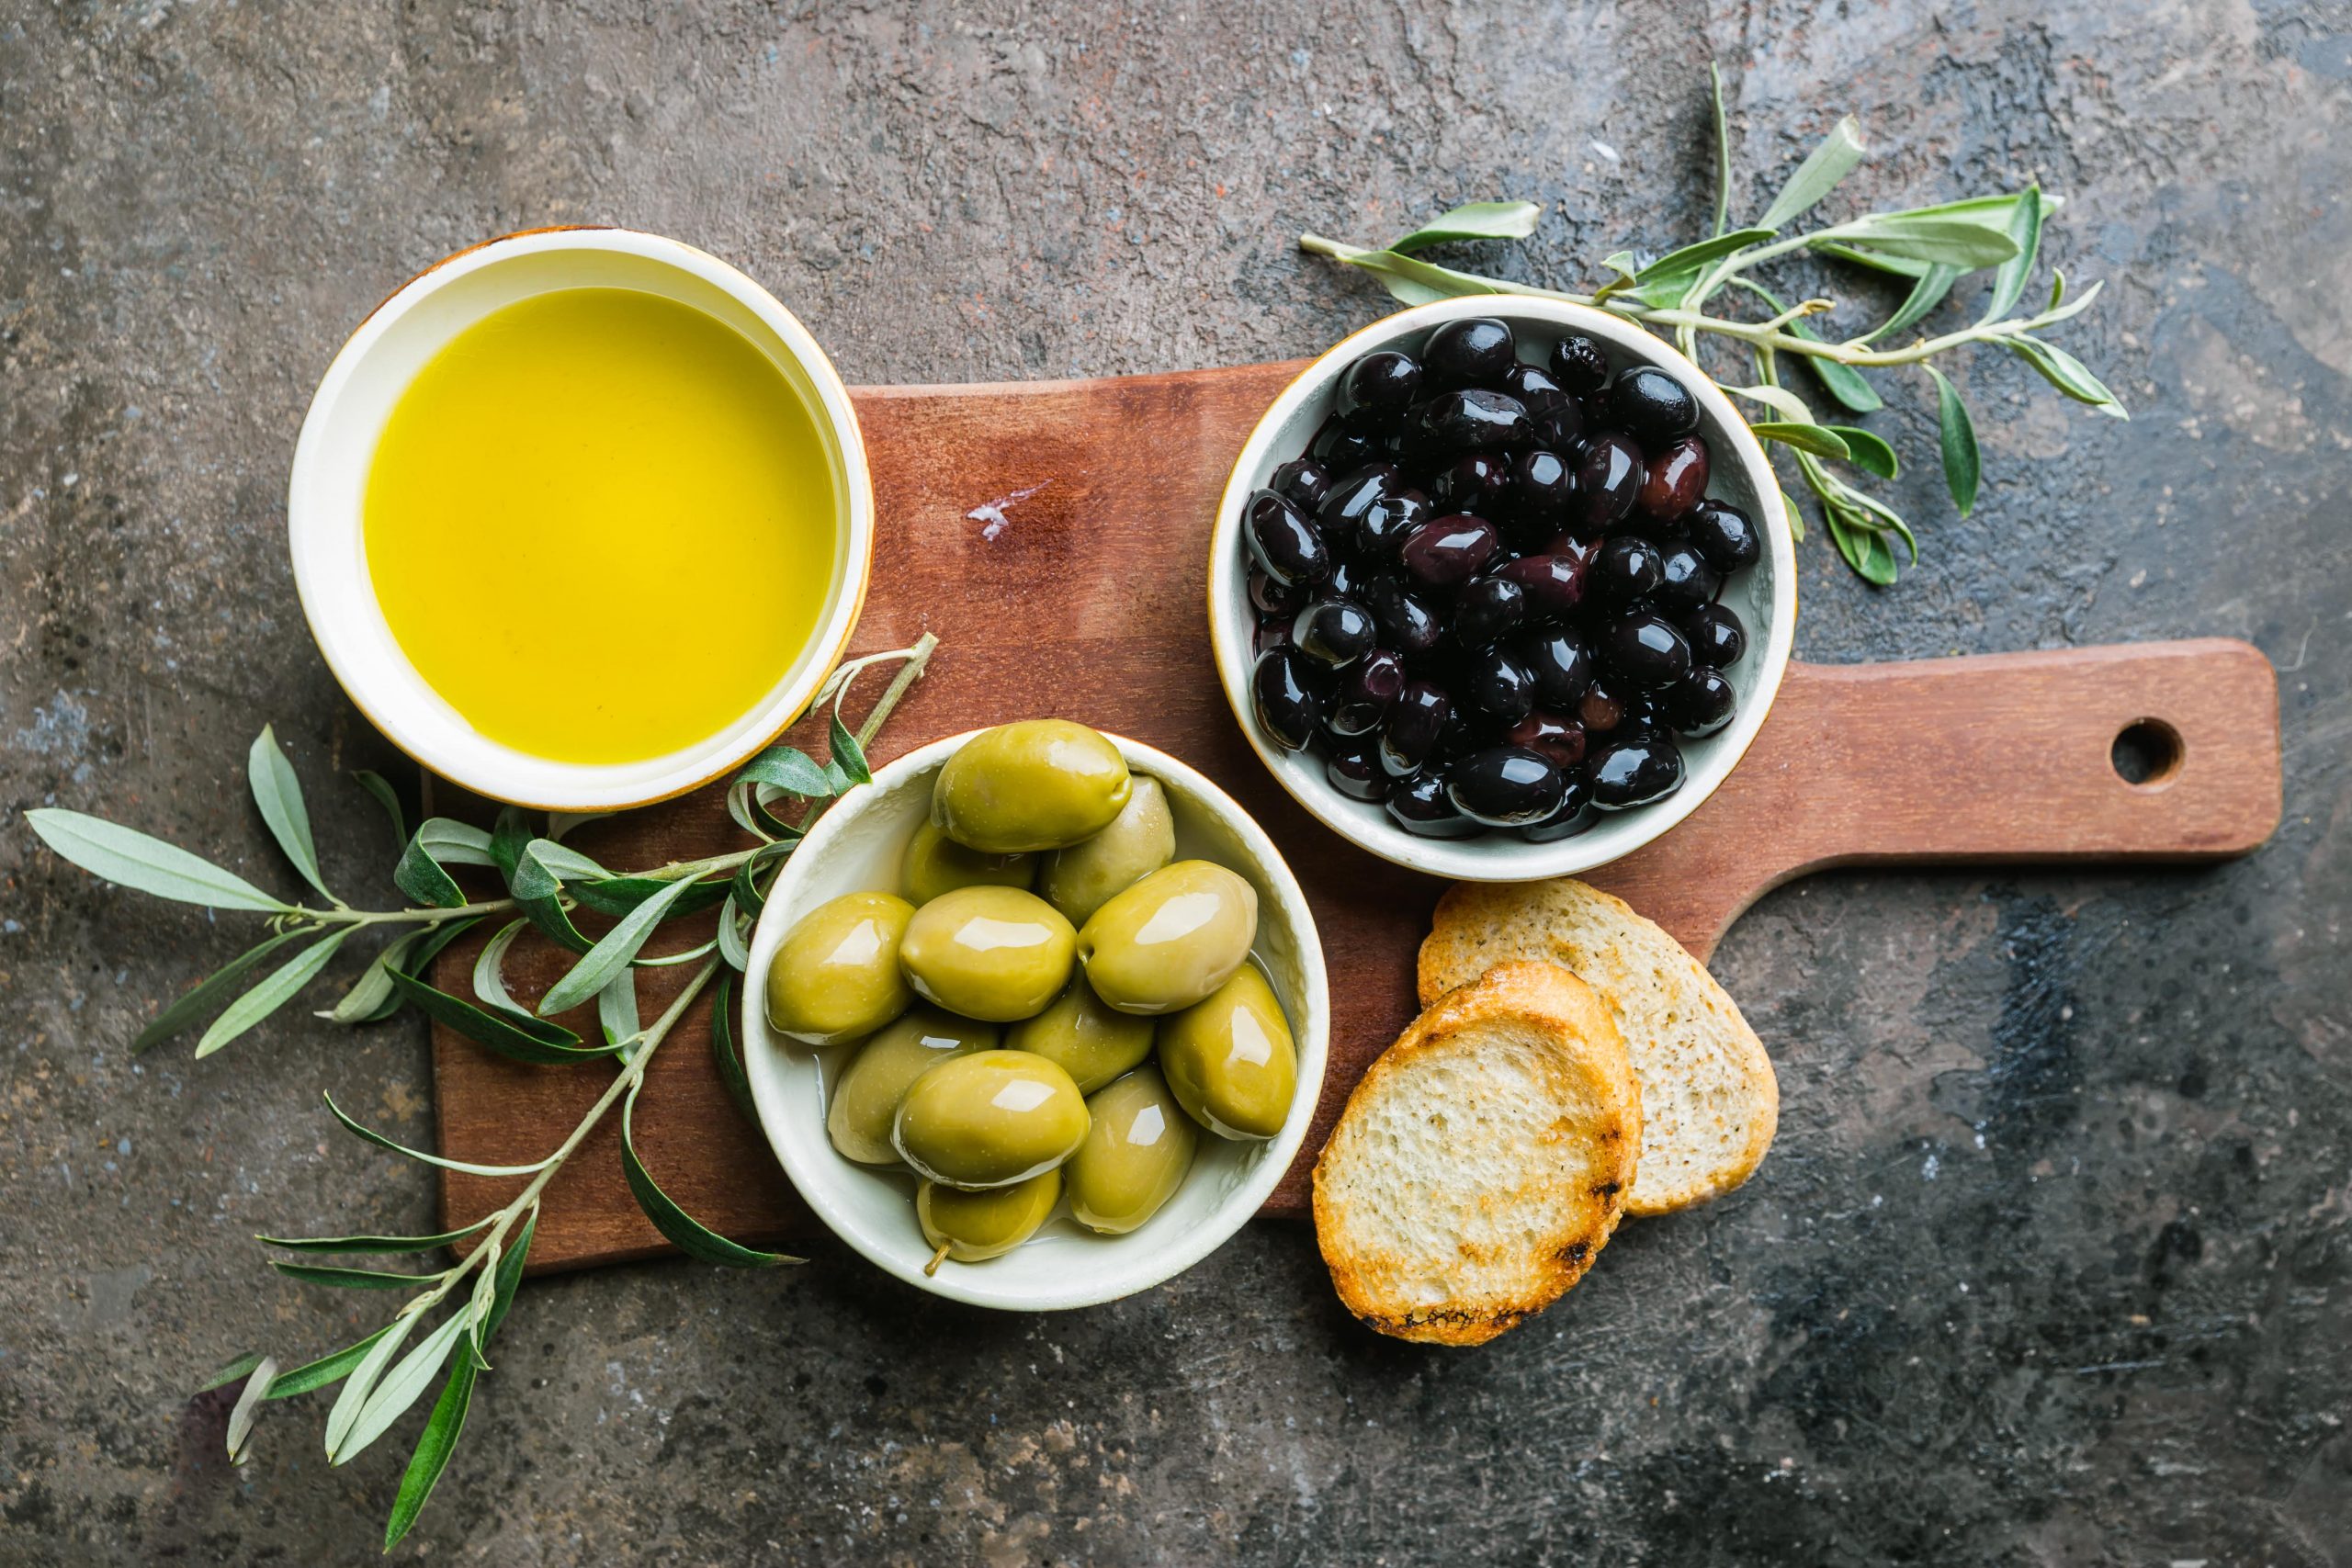 Different Types of Olives and EVOO in Spain